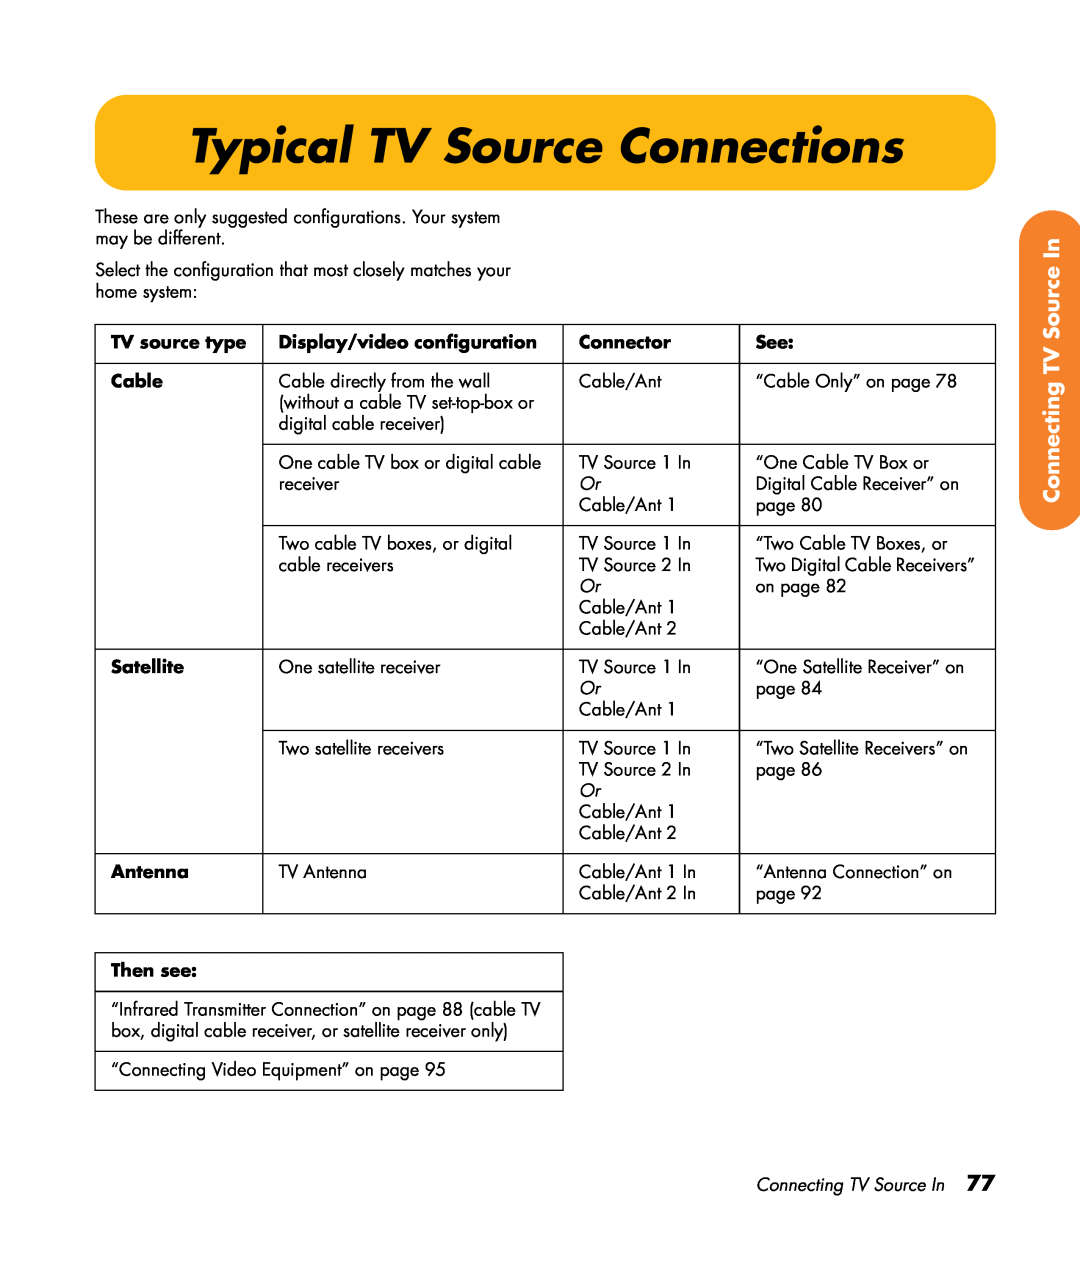 HP z545 Typical TV Source Connections, Connecting TV Source In, TV source type, Display/video configuration, Connector 